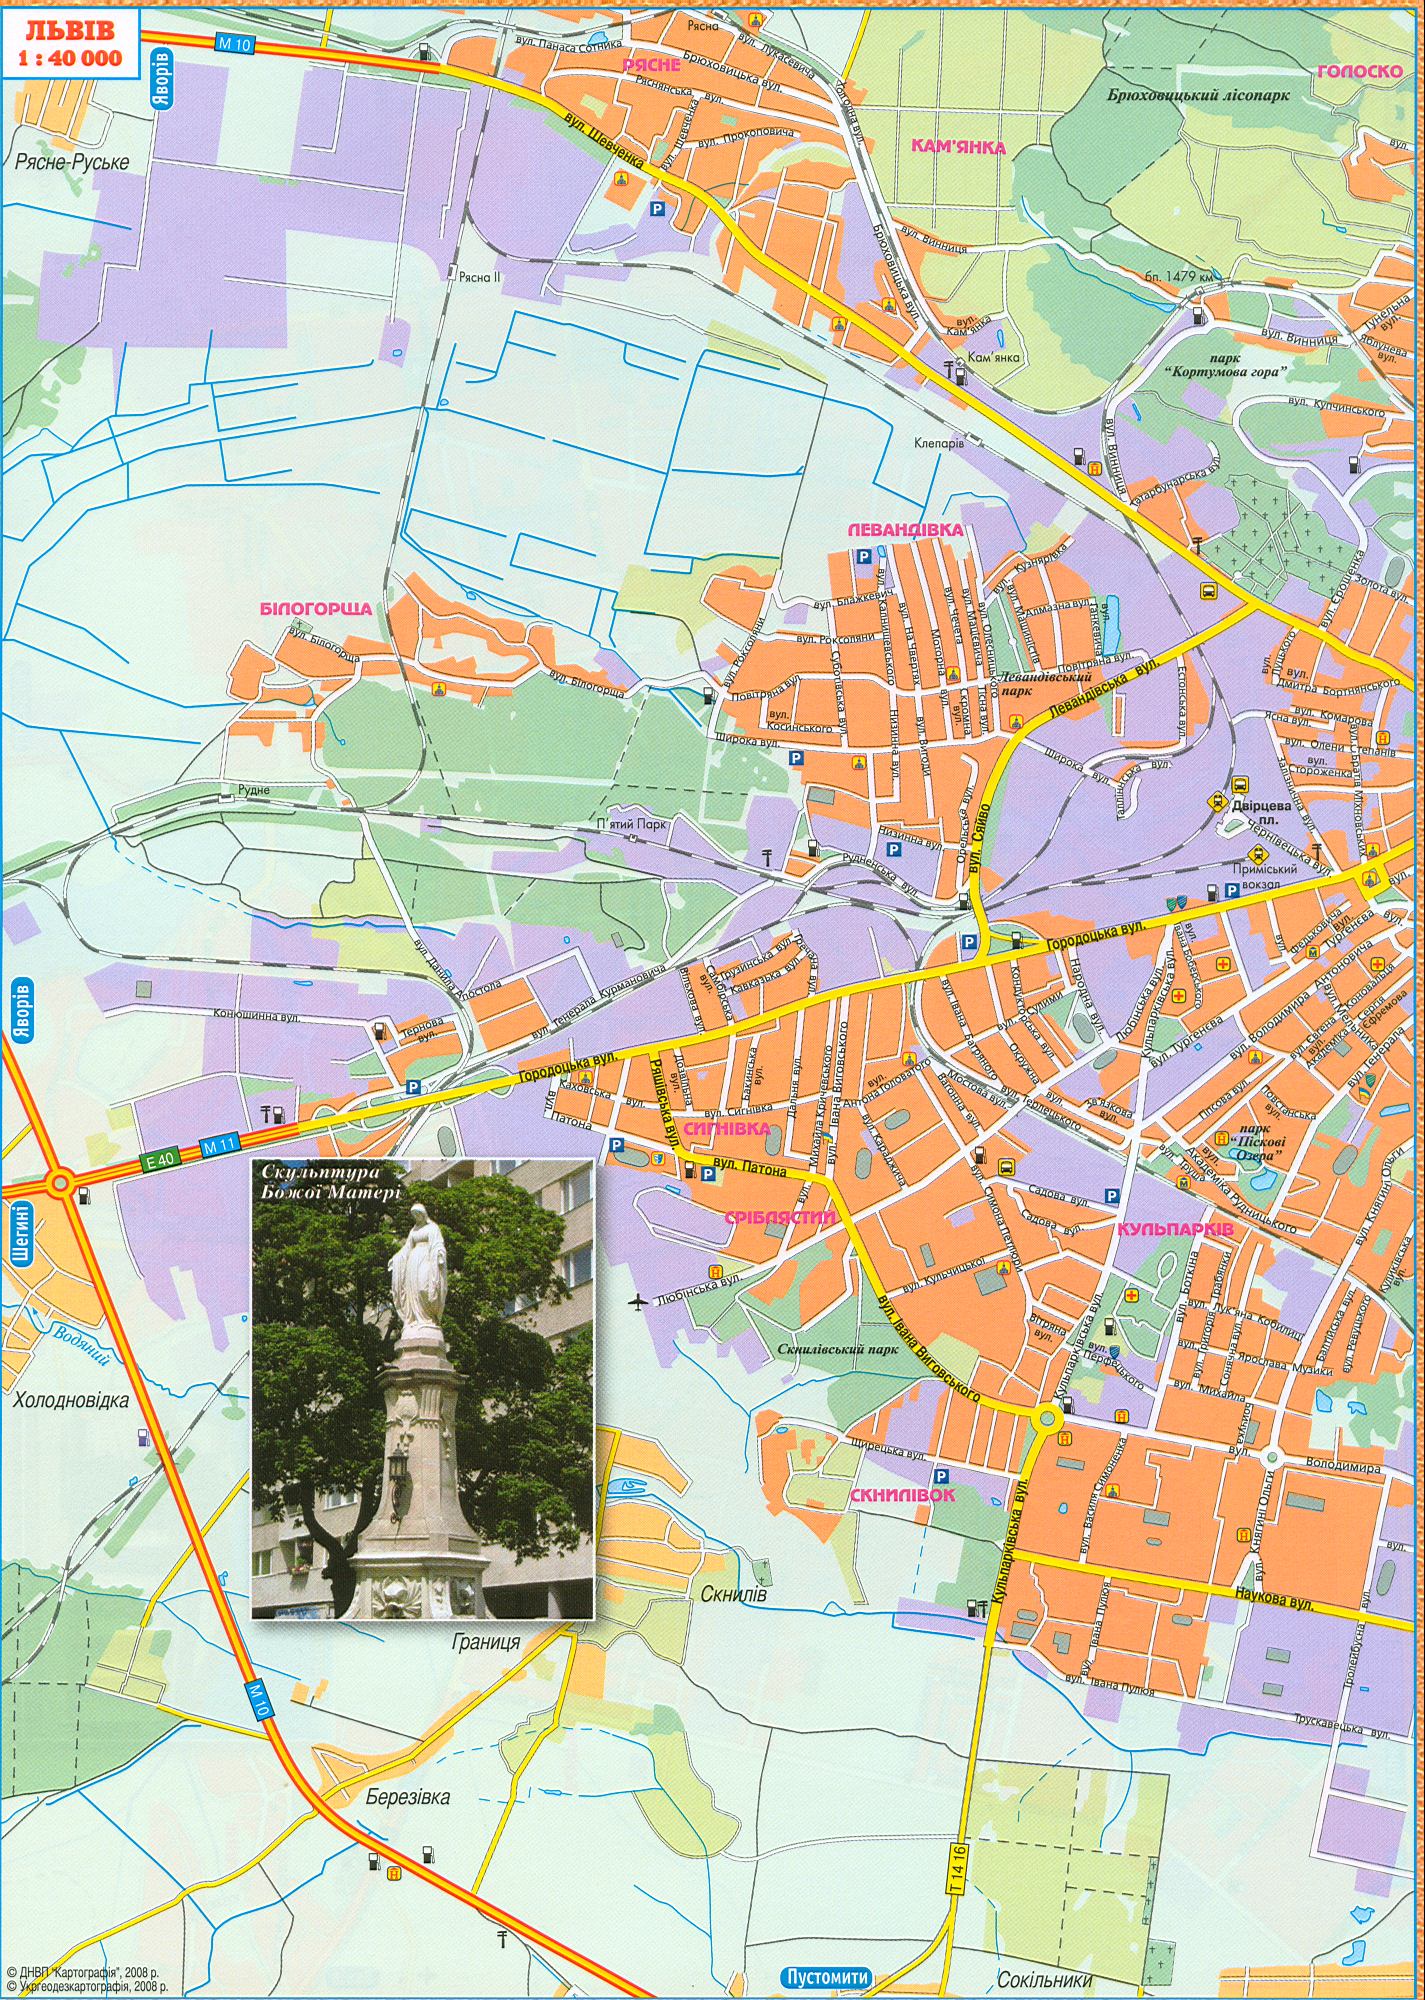 Lvava map. Small-scale card scheme Lviv city roads. Download for free